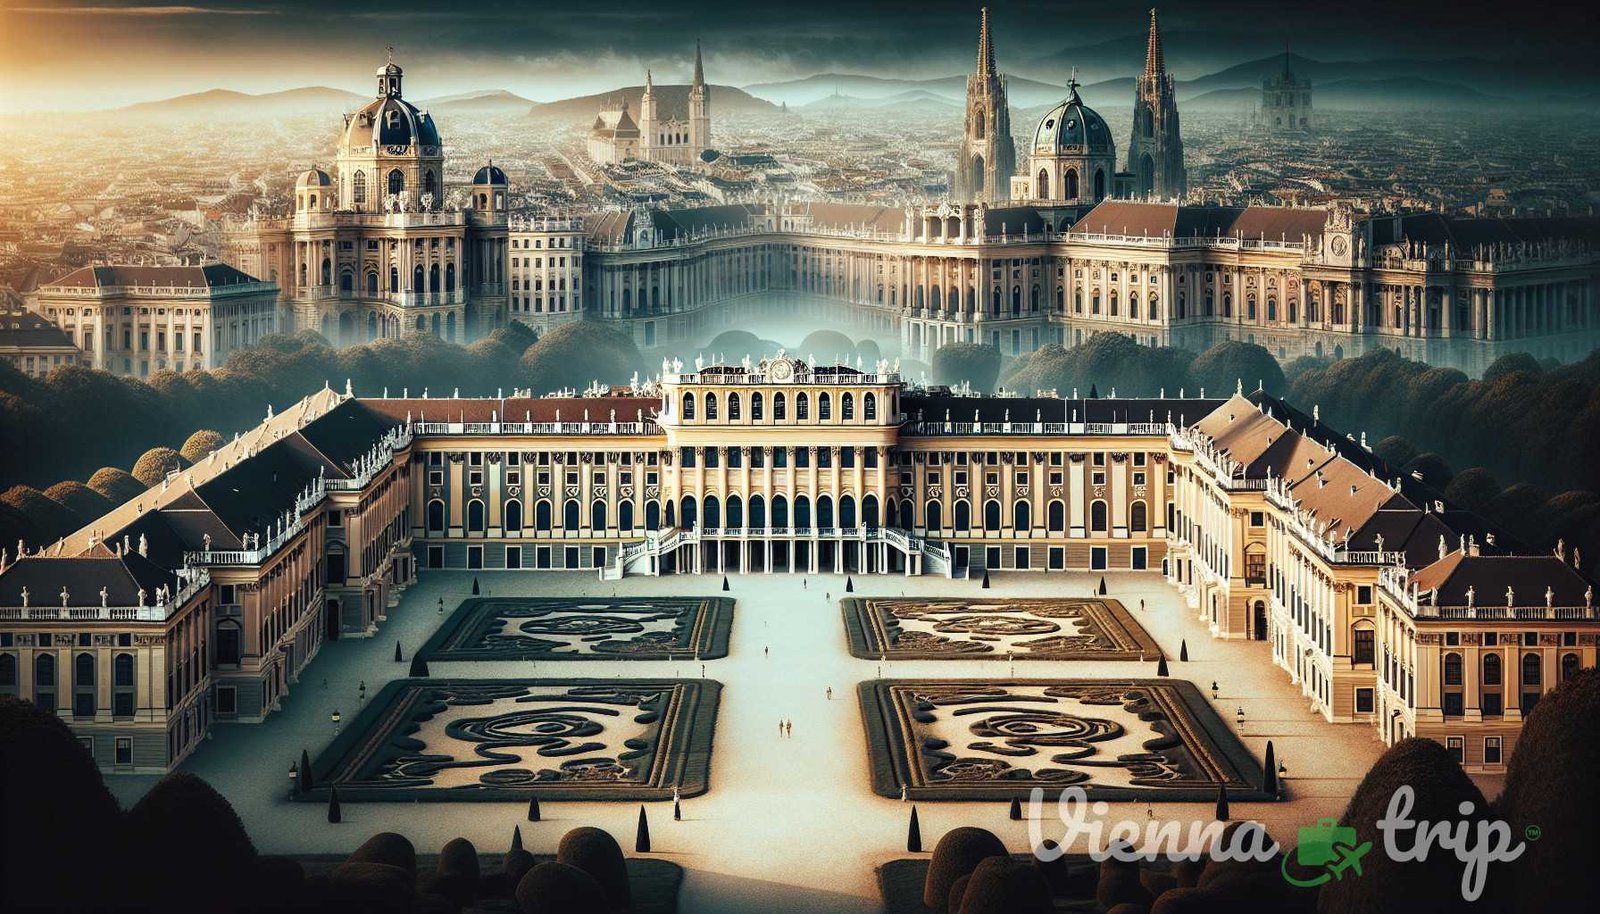 Illustration for section: For an immersive experience, visit Schönbrunn Palace and uncover these hidden secrets firsthand. Th - viennese secrets